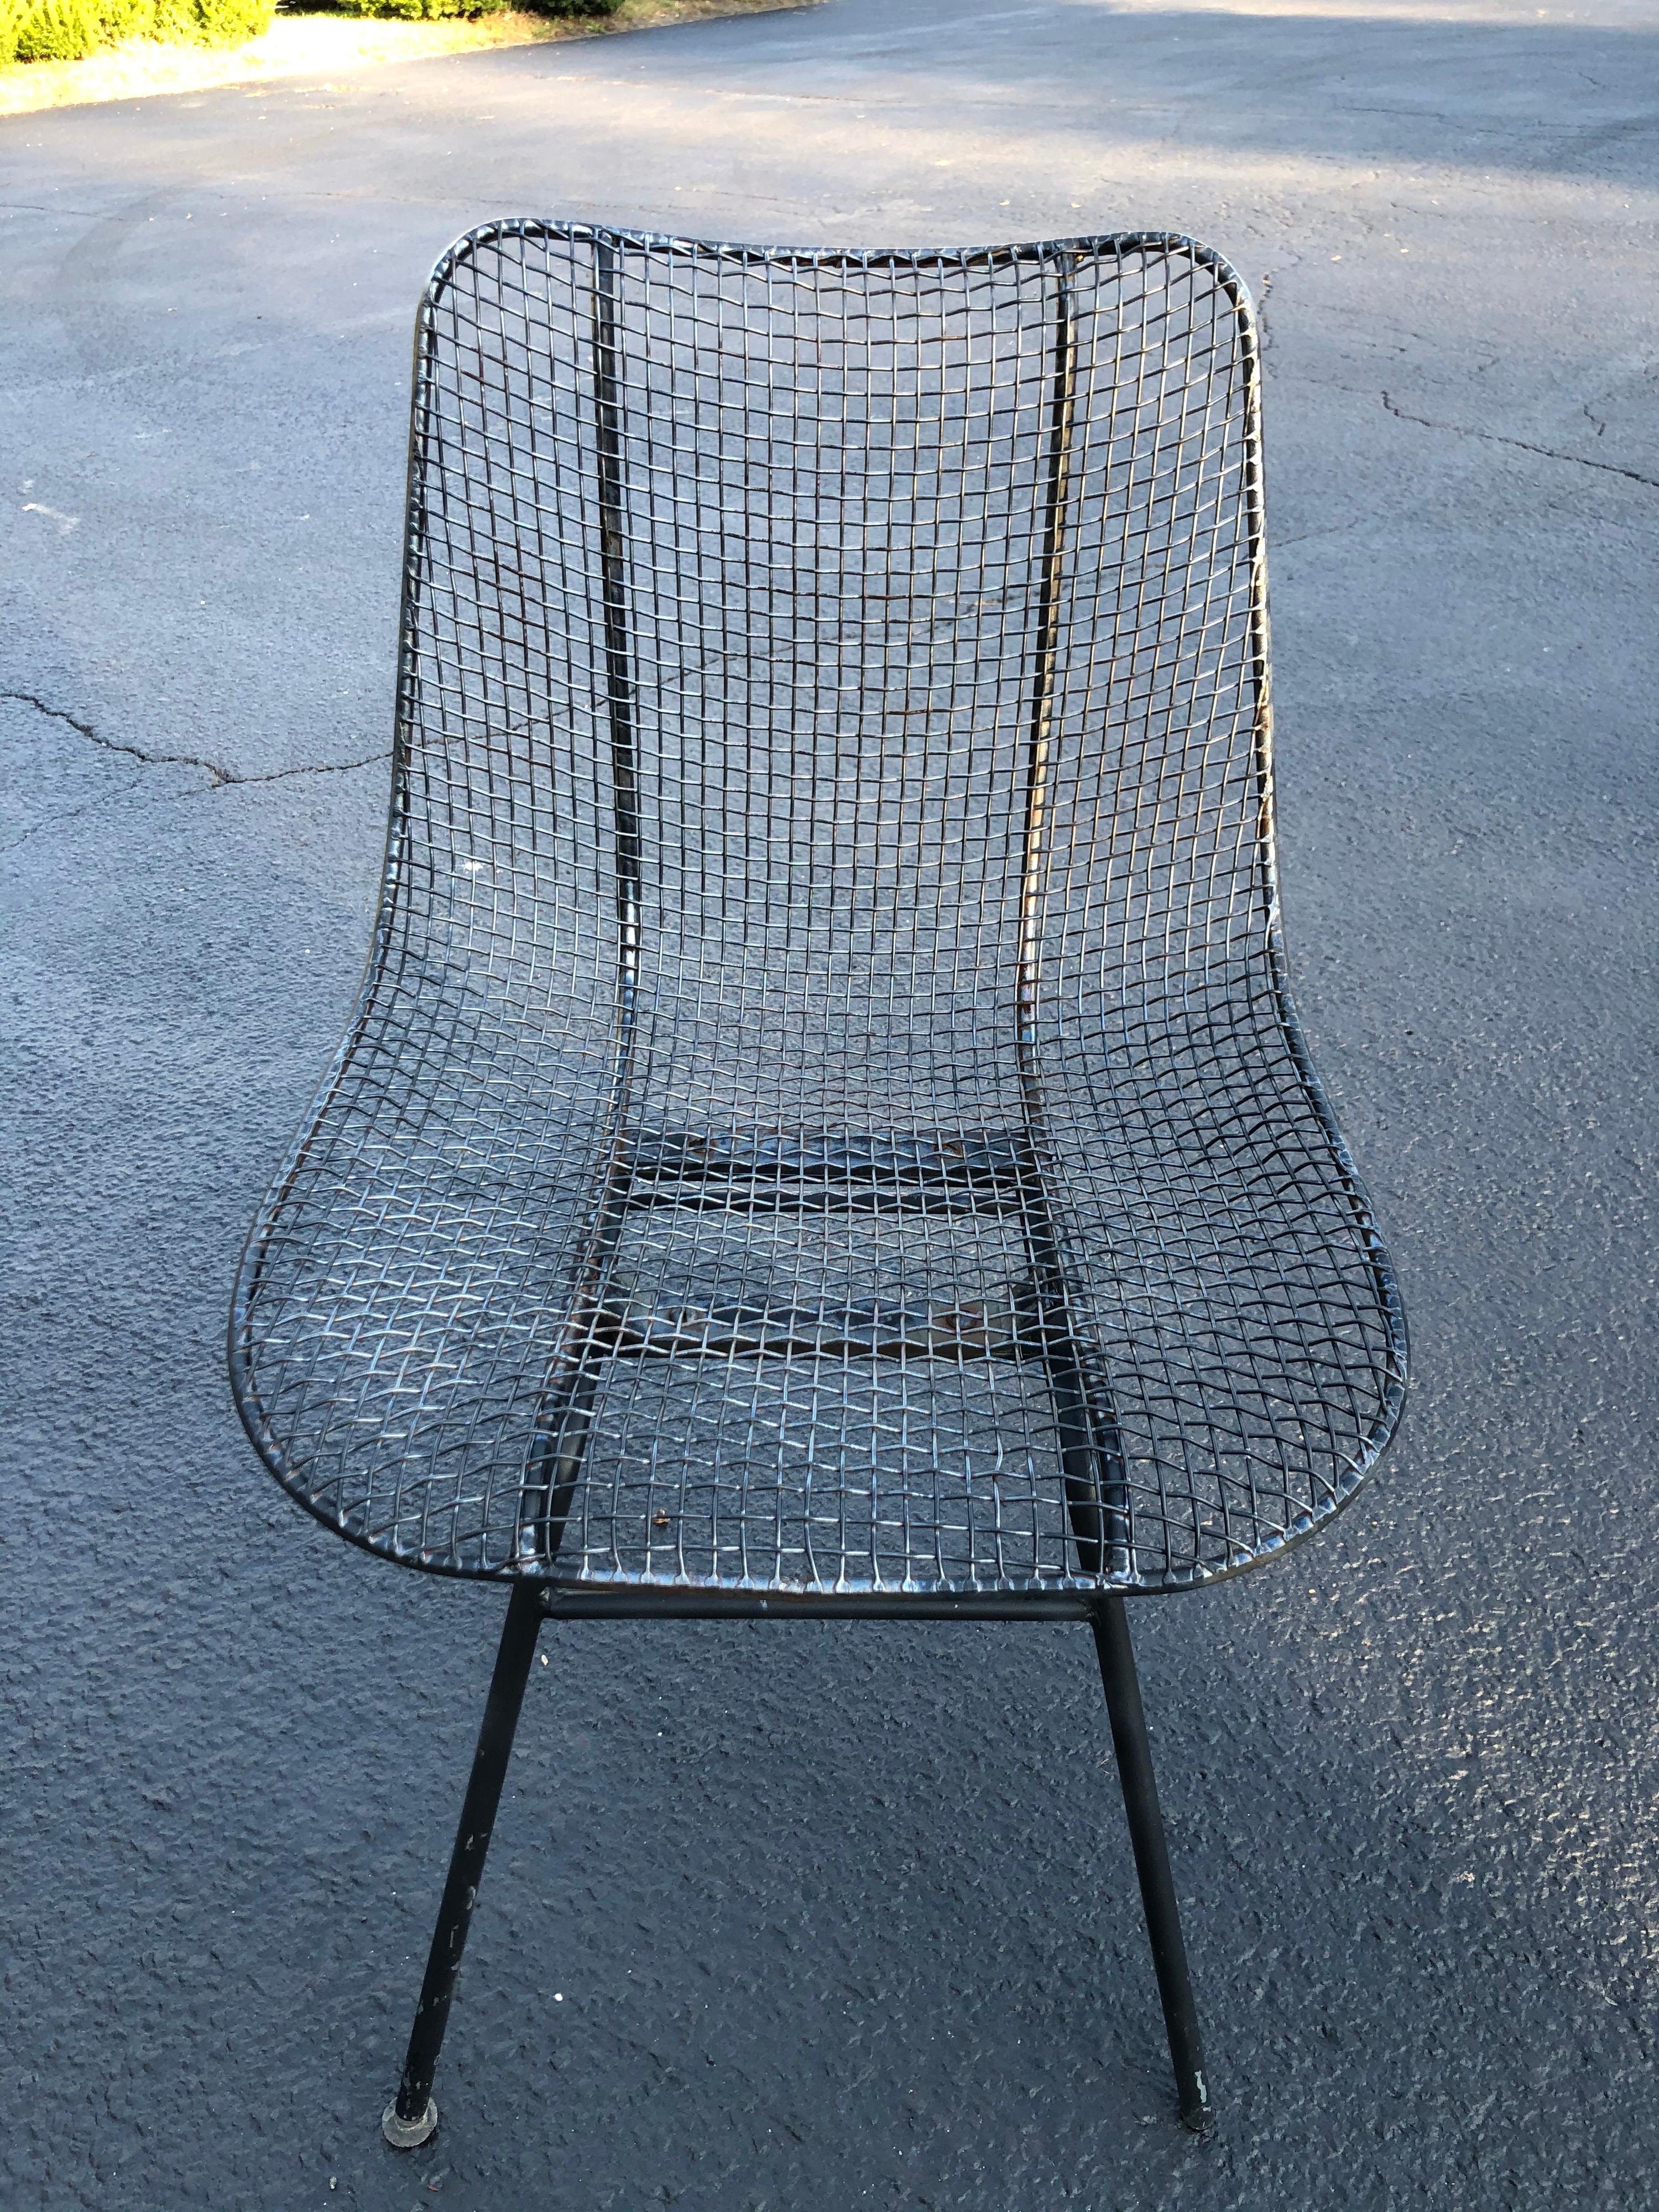 Vintage John Woodard sculptura metal mesh sculptura chair. Black finish, some rust, but it can be repainted in any color. Missing two glides on feet. Could be ordered on line. We can parcel ship this very economically. Please  inquire about that